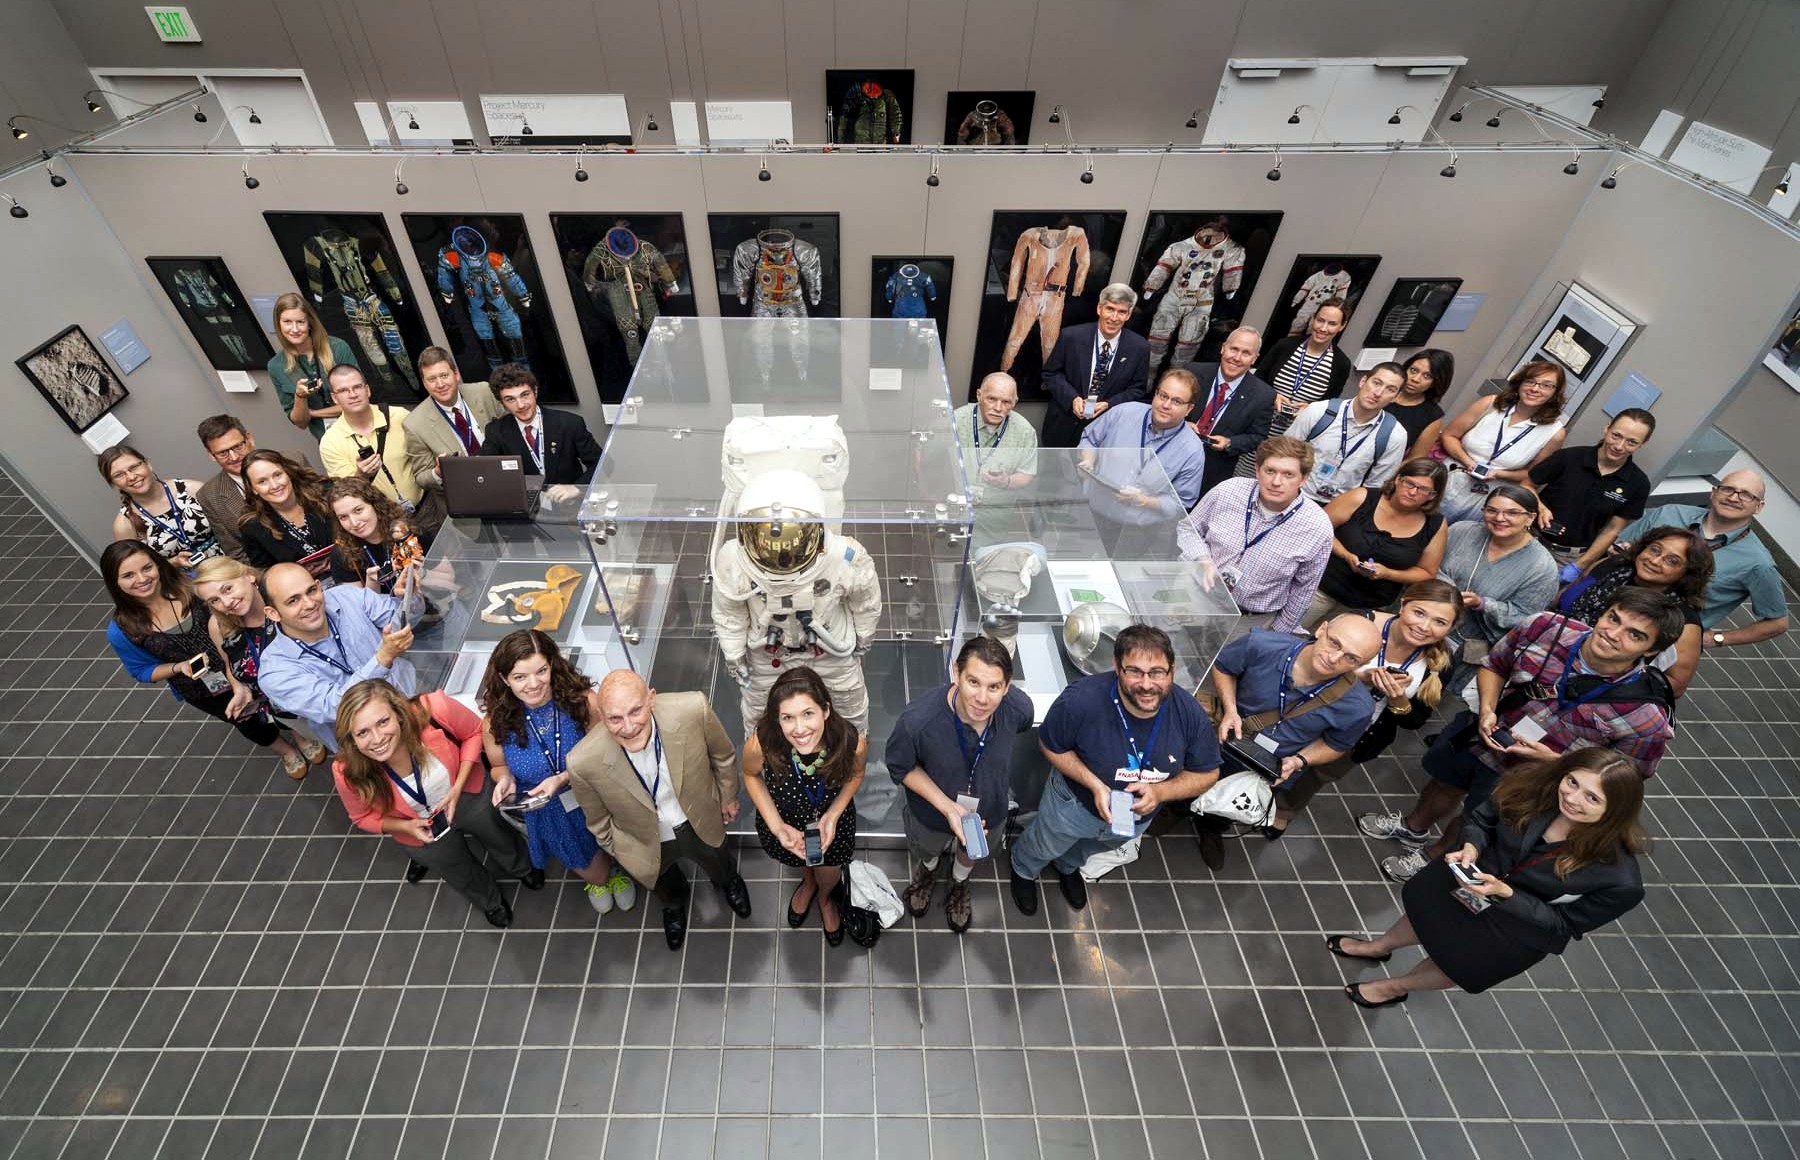 Suited for Space Social - Group Photo - Smithsonian posted on AmericaSpace